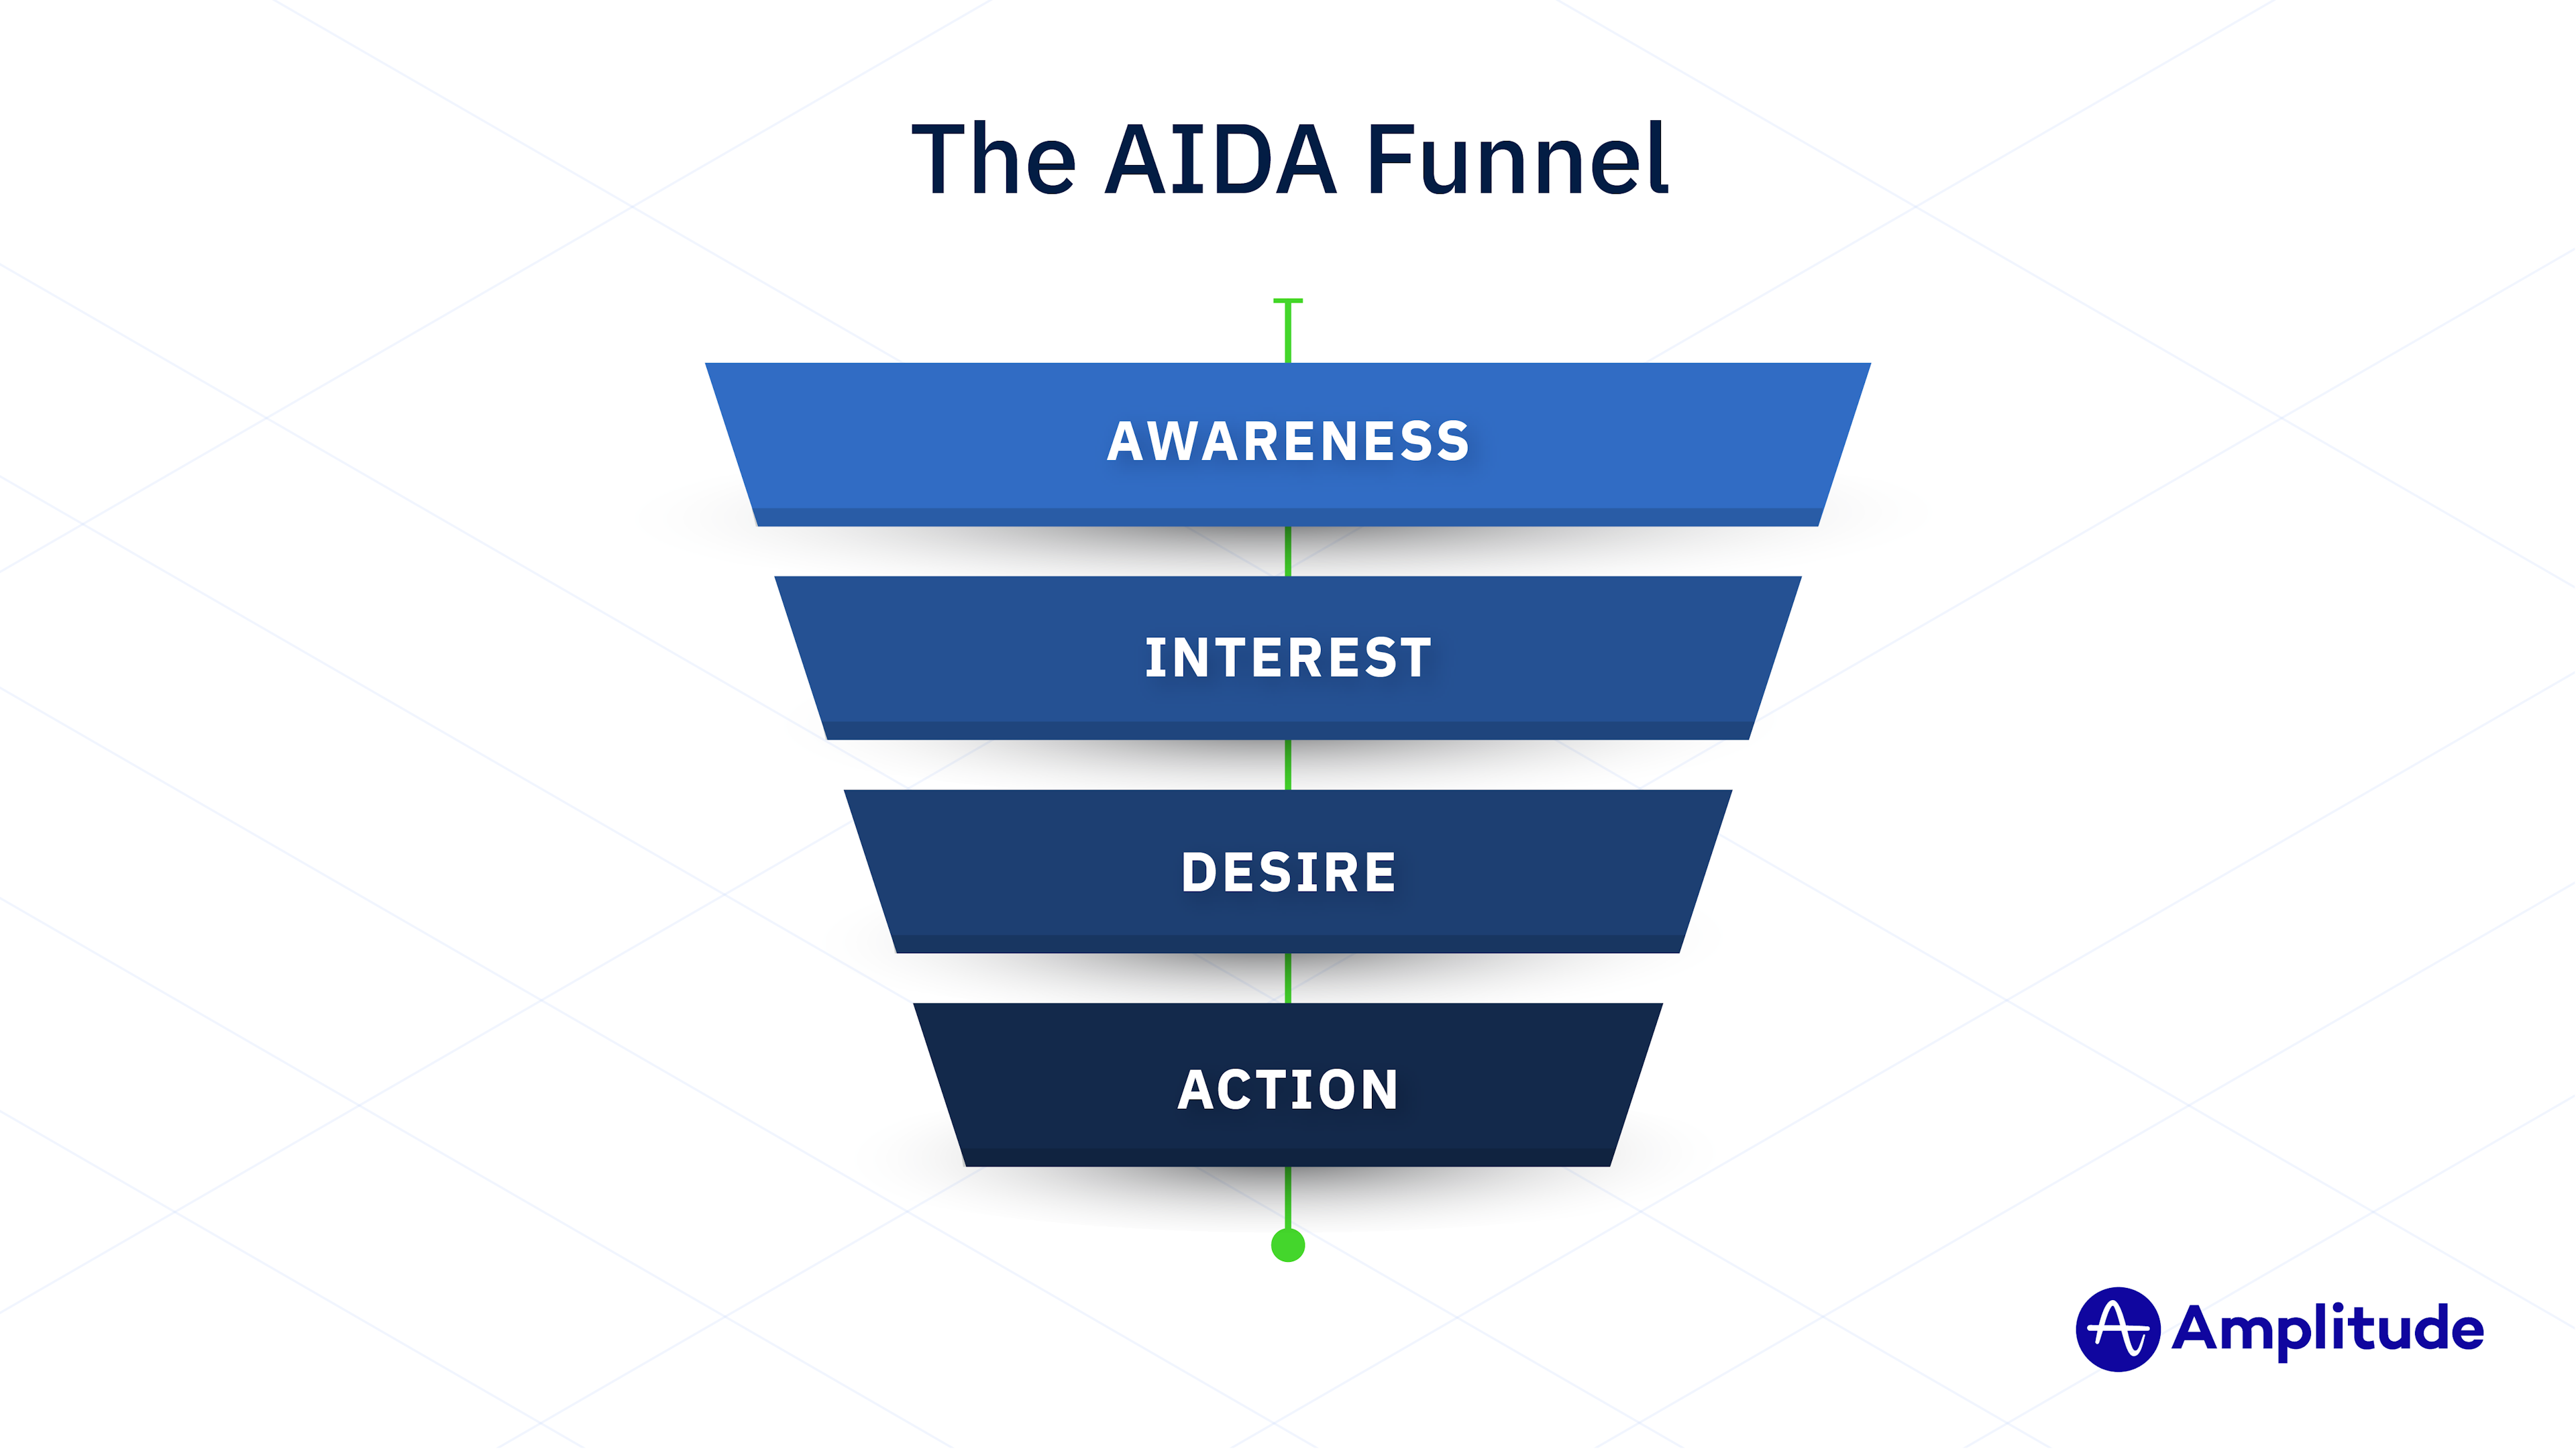 The AIDA model has four steps: awareness, interest, desire, and action